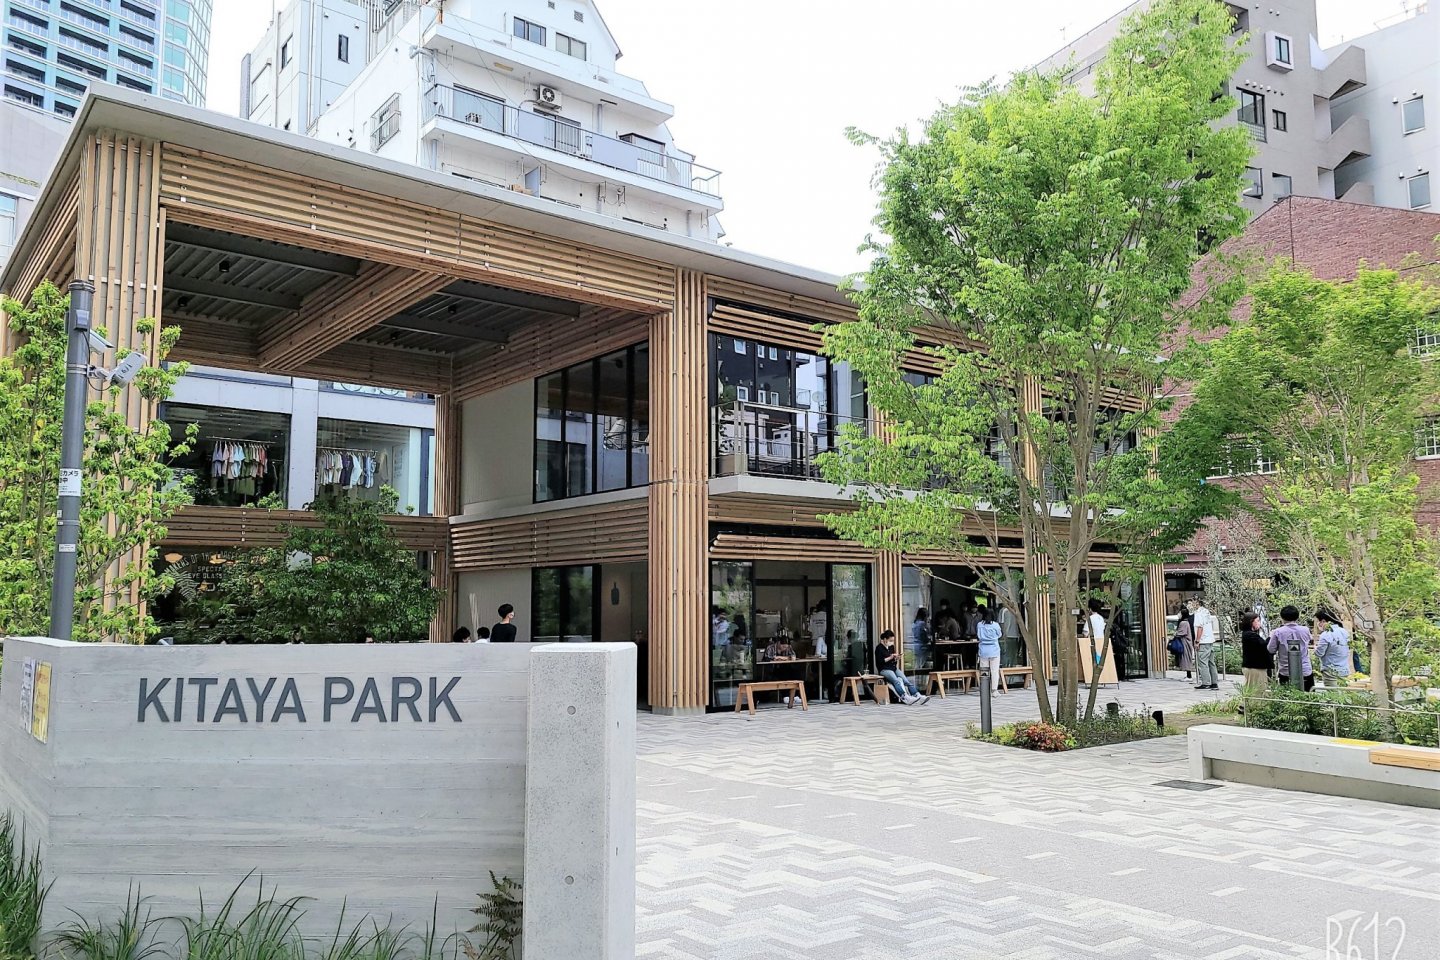 The park is located near the Shibuya ward office building and NHK